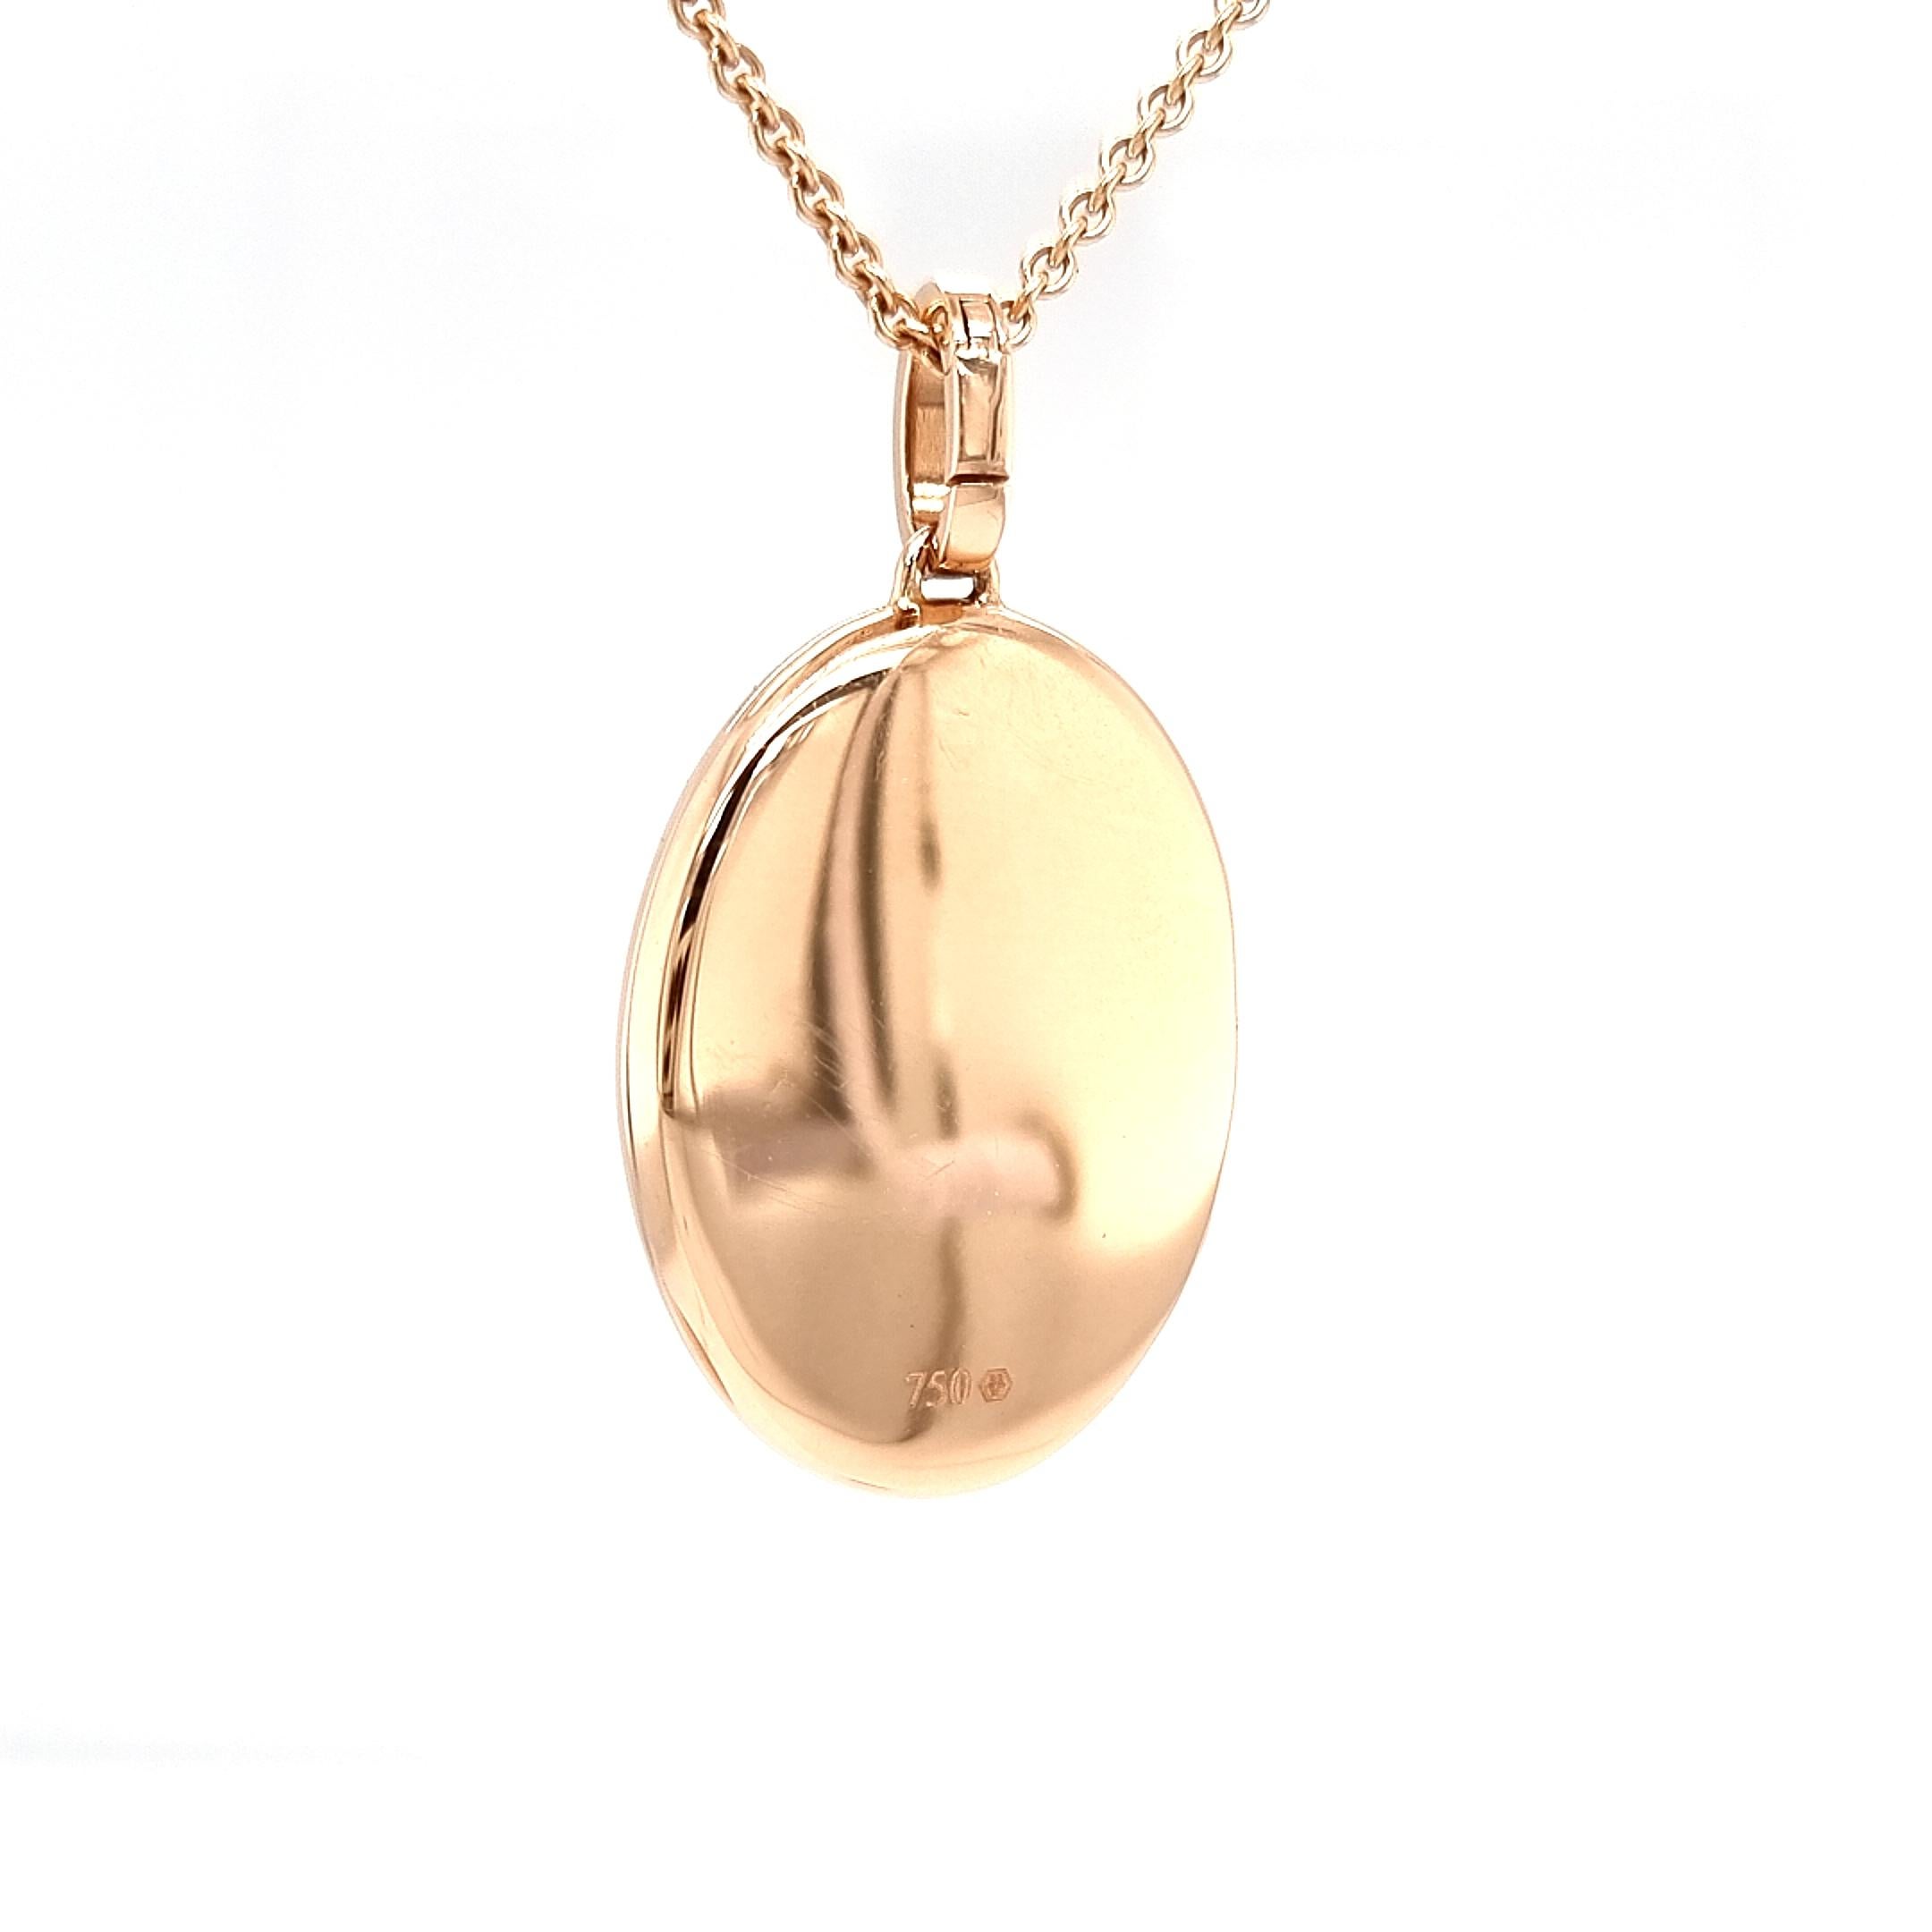 Contemporary Oval Locket Pendant Necklace - 18k Rose Gold - 1 Diamond 0.10 ct H VS Pink Pearl For Sale